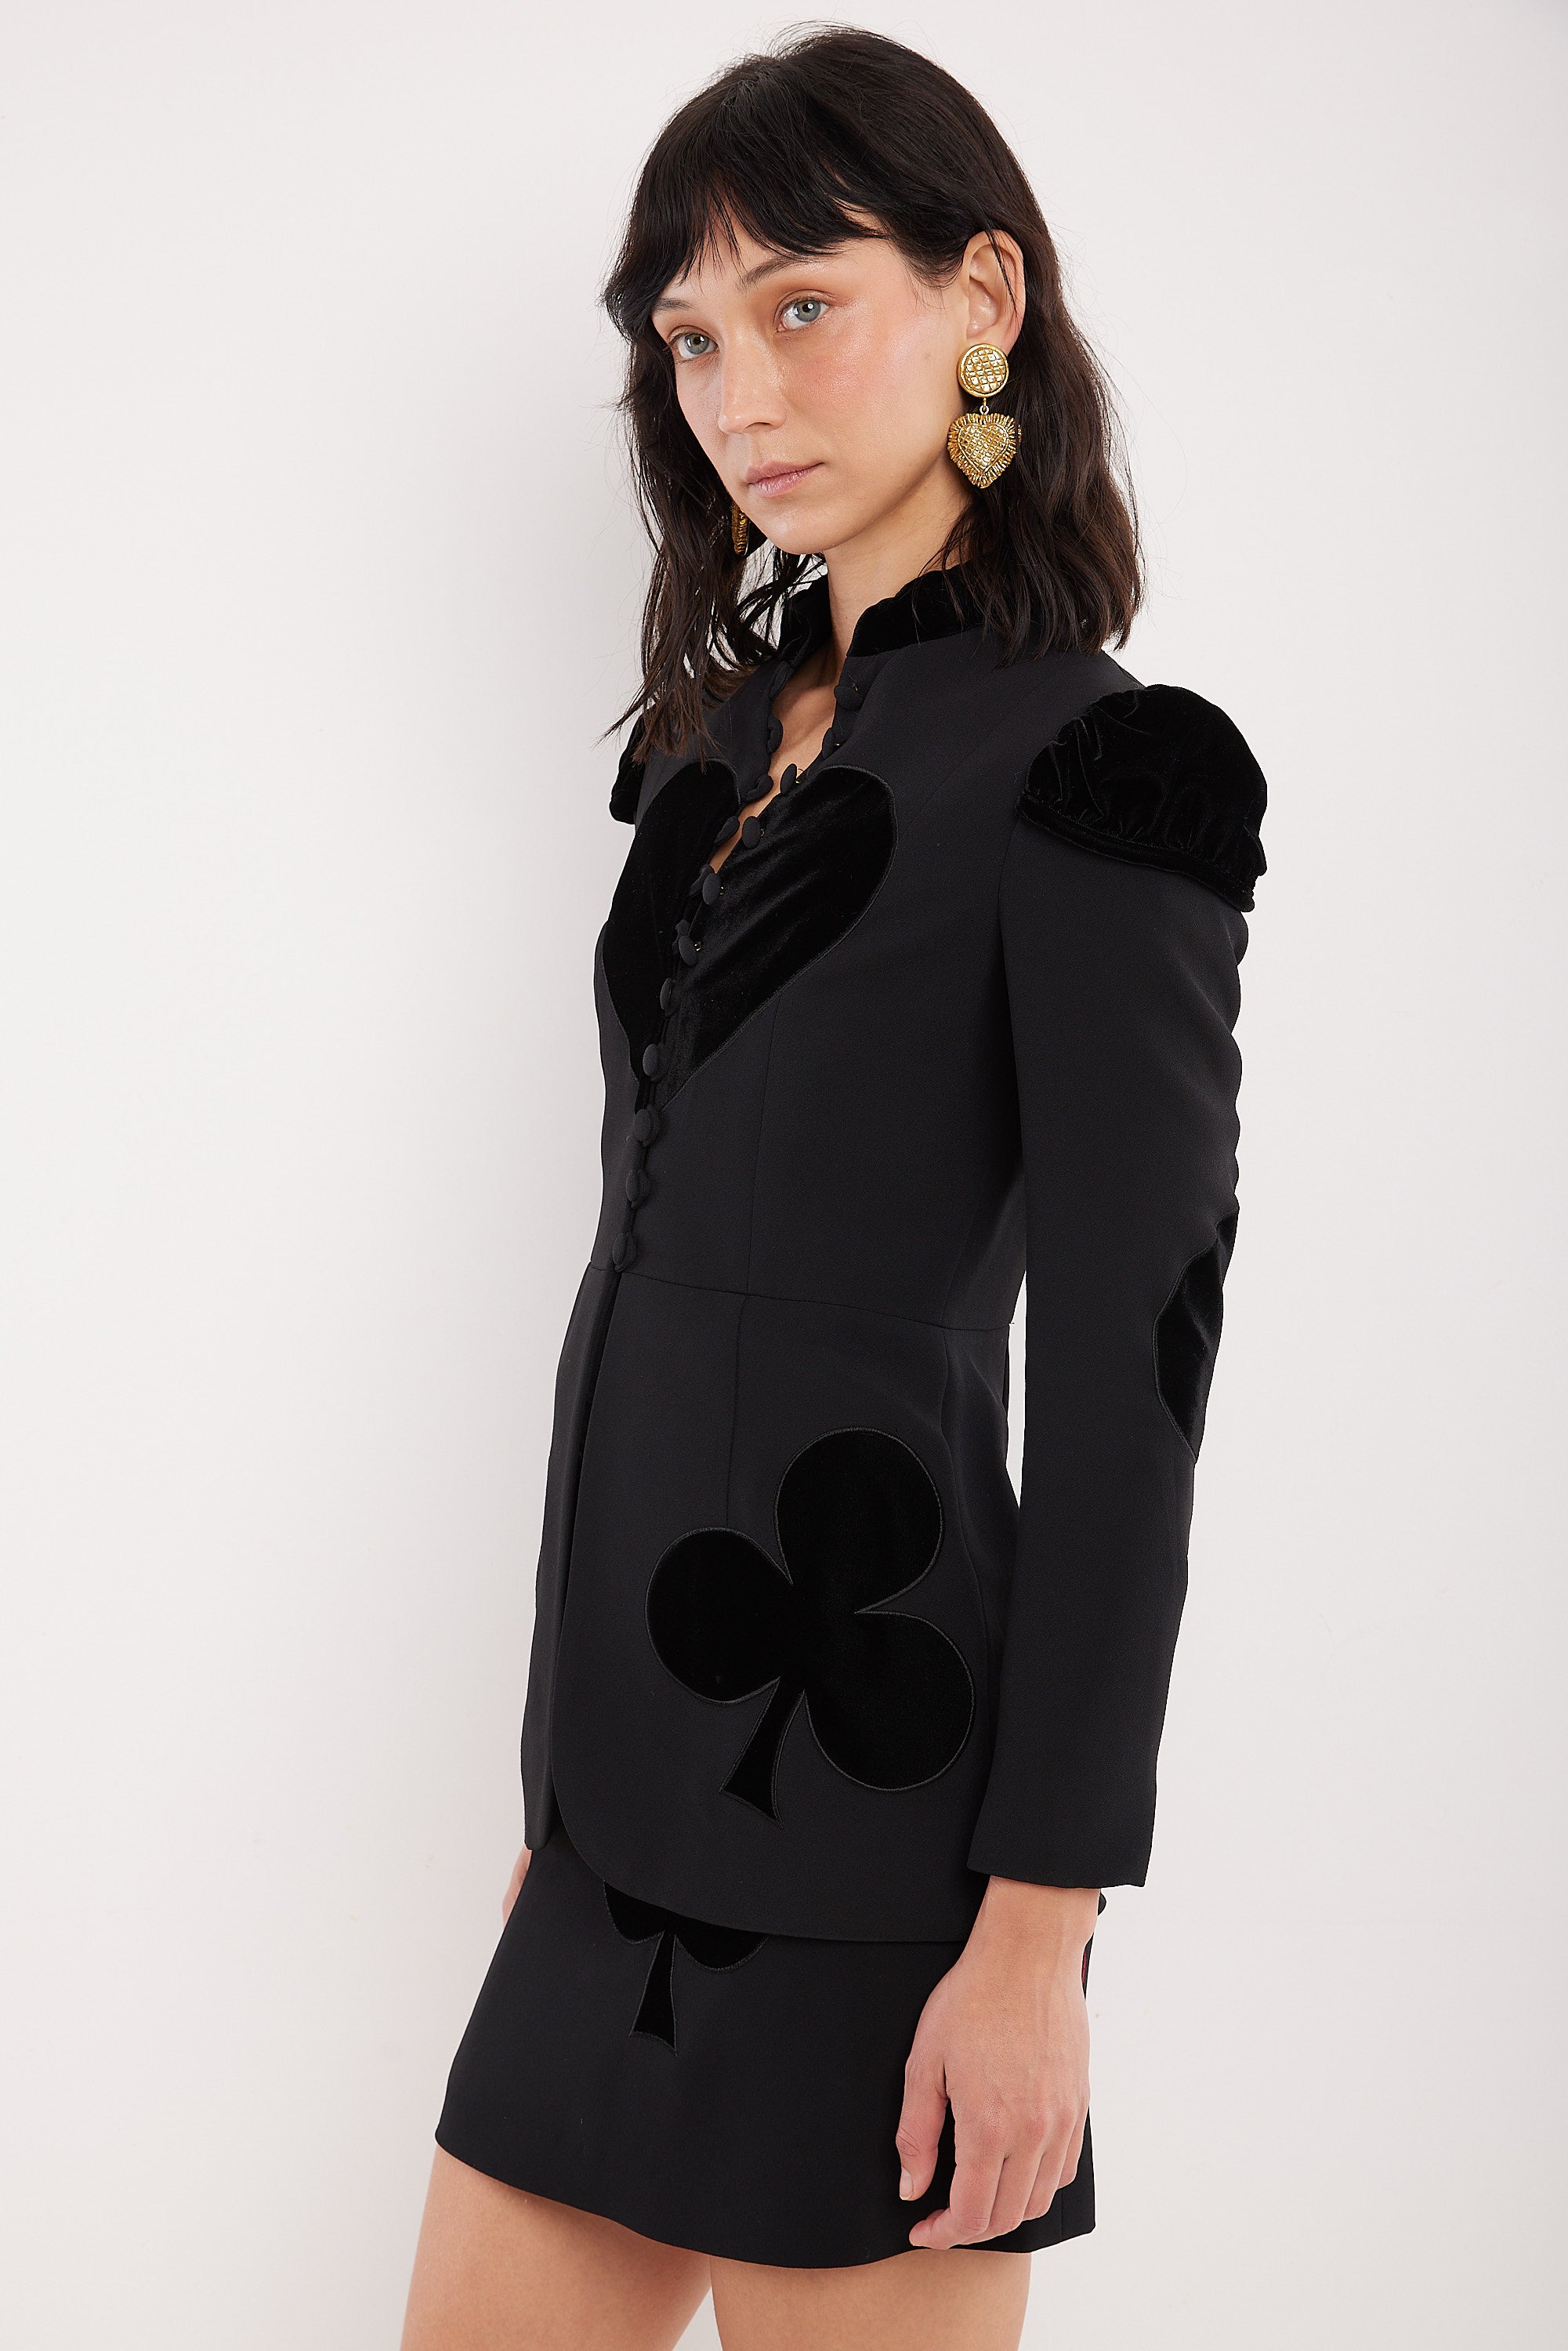 Moschino <br> 90's Cheap & Chic three piece playing card skirt suit